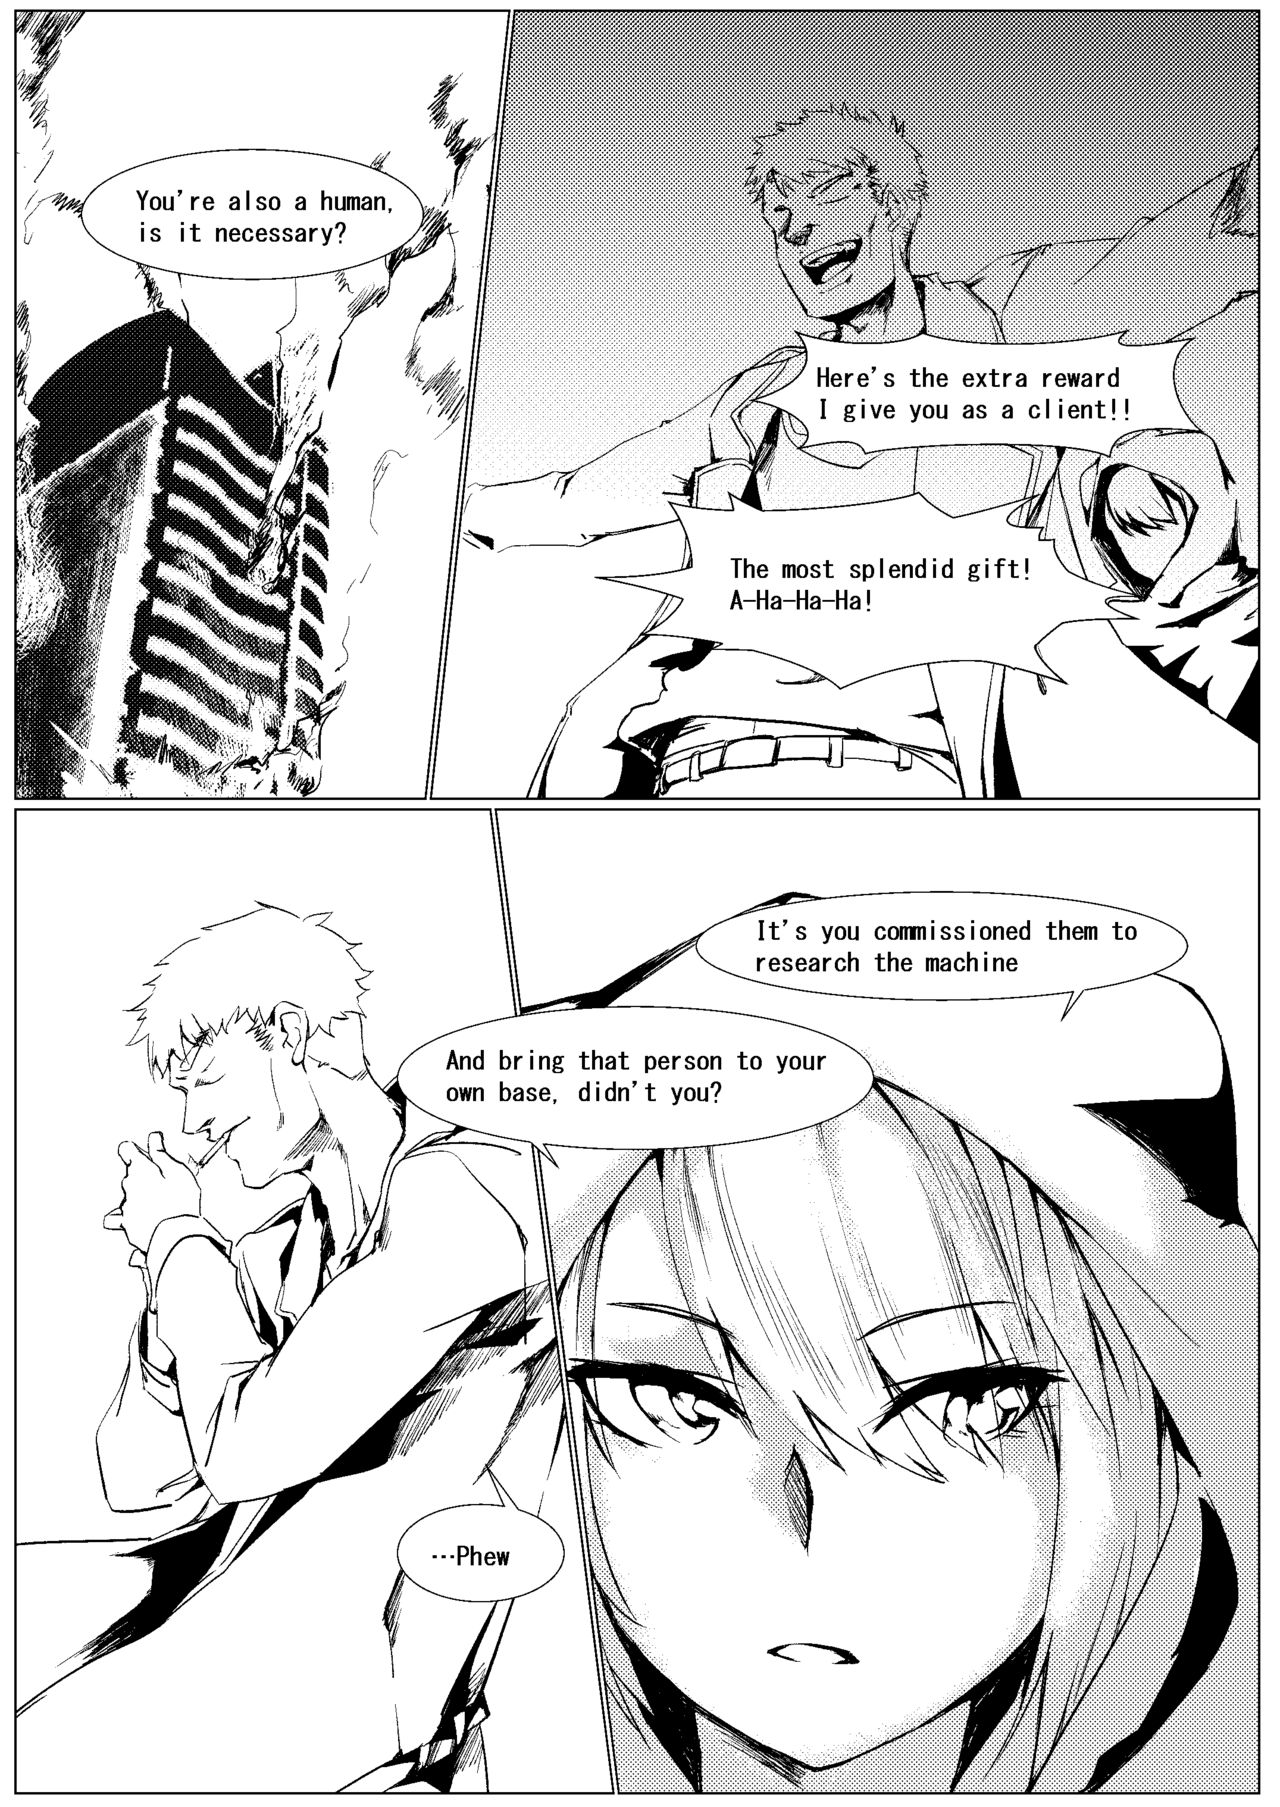 [tangent3625] Griffin Entertainment Dolls Hall [English] page 41 full